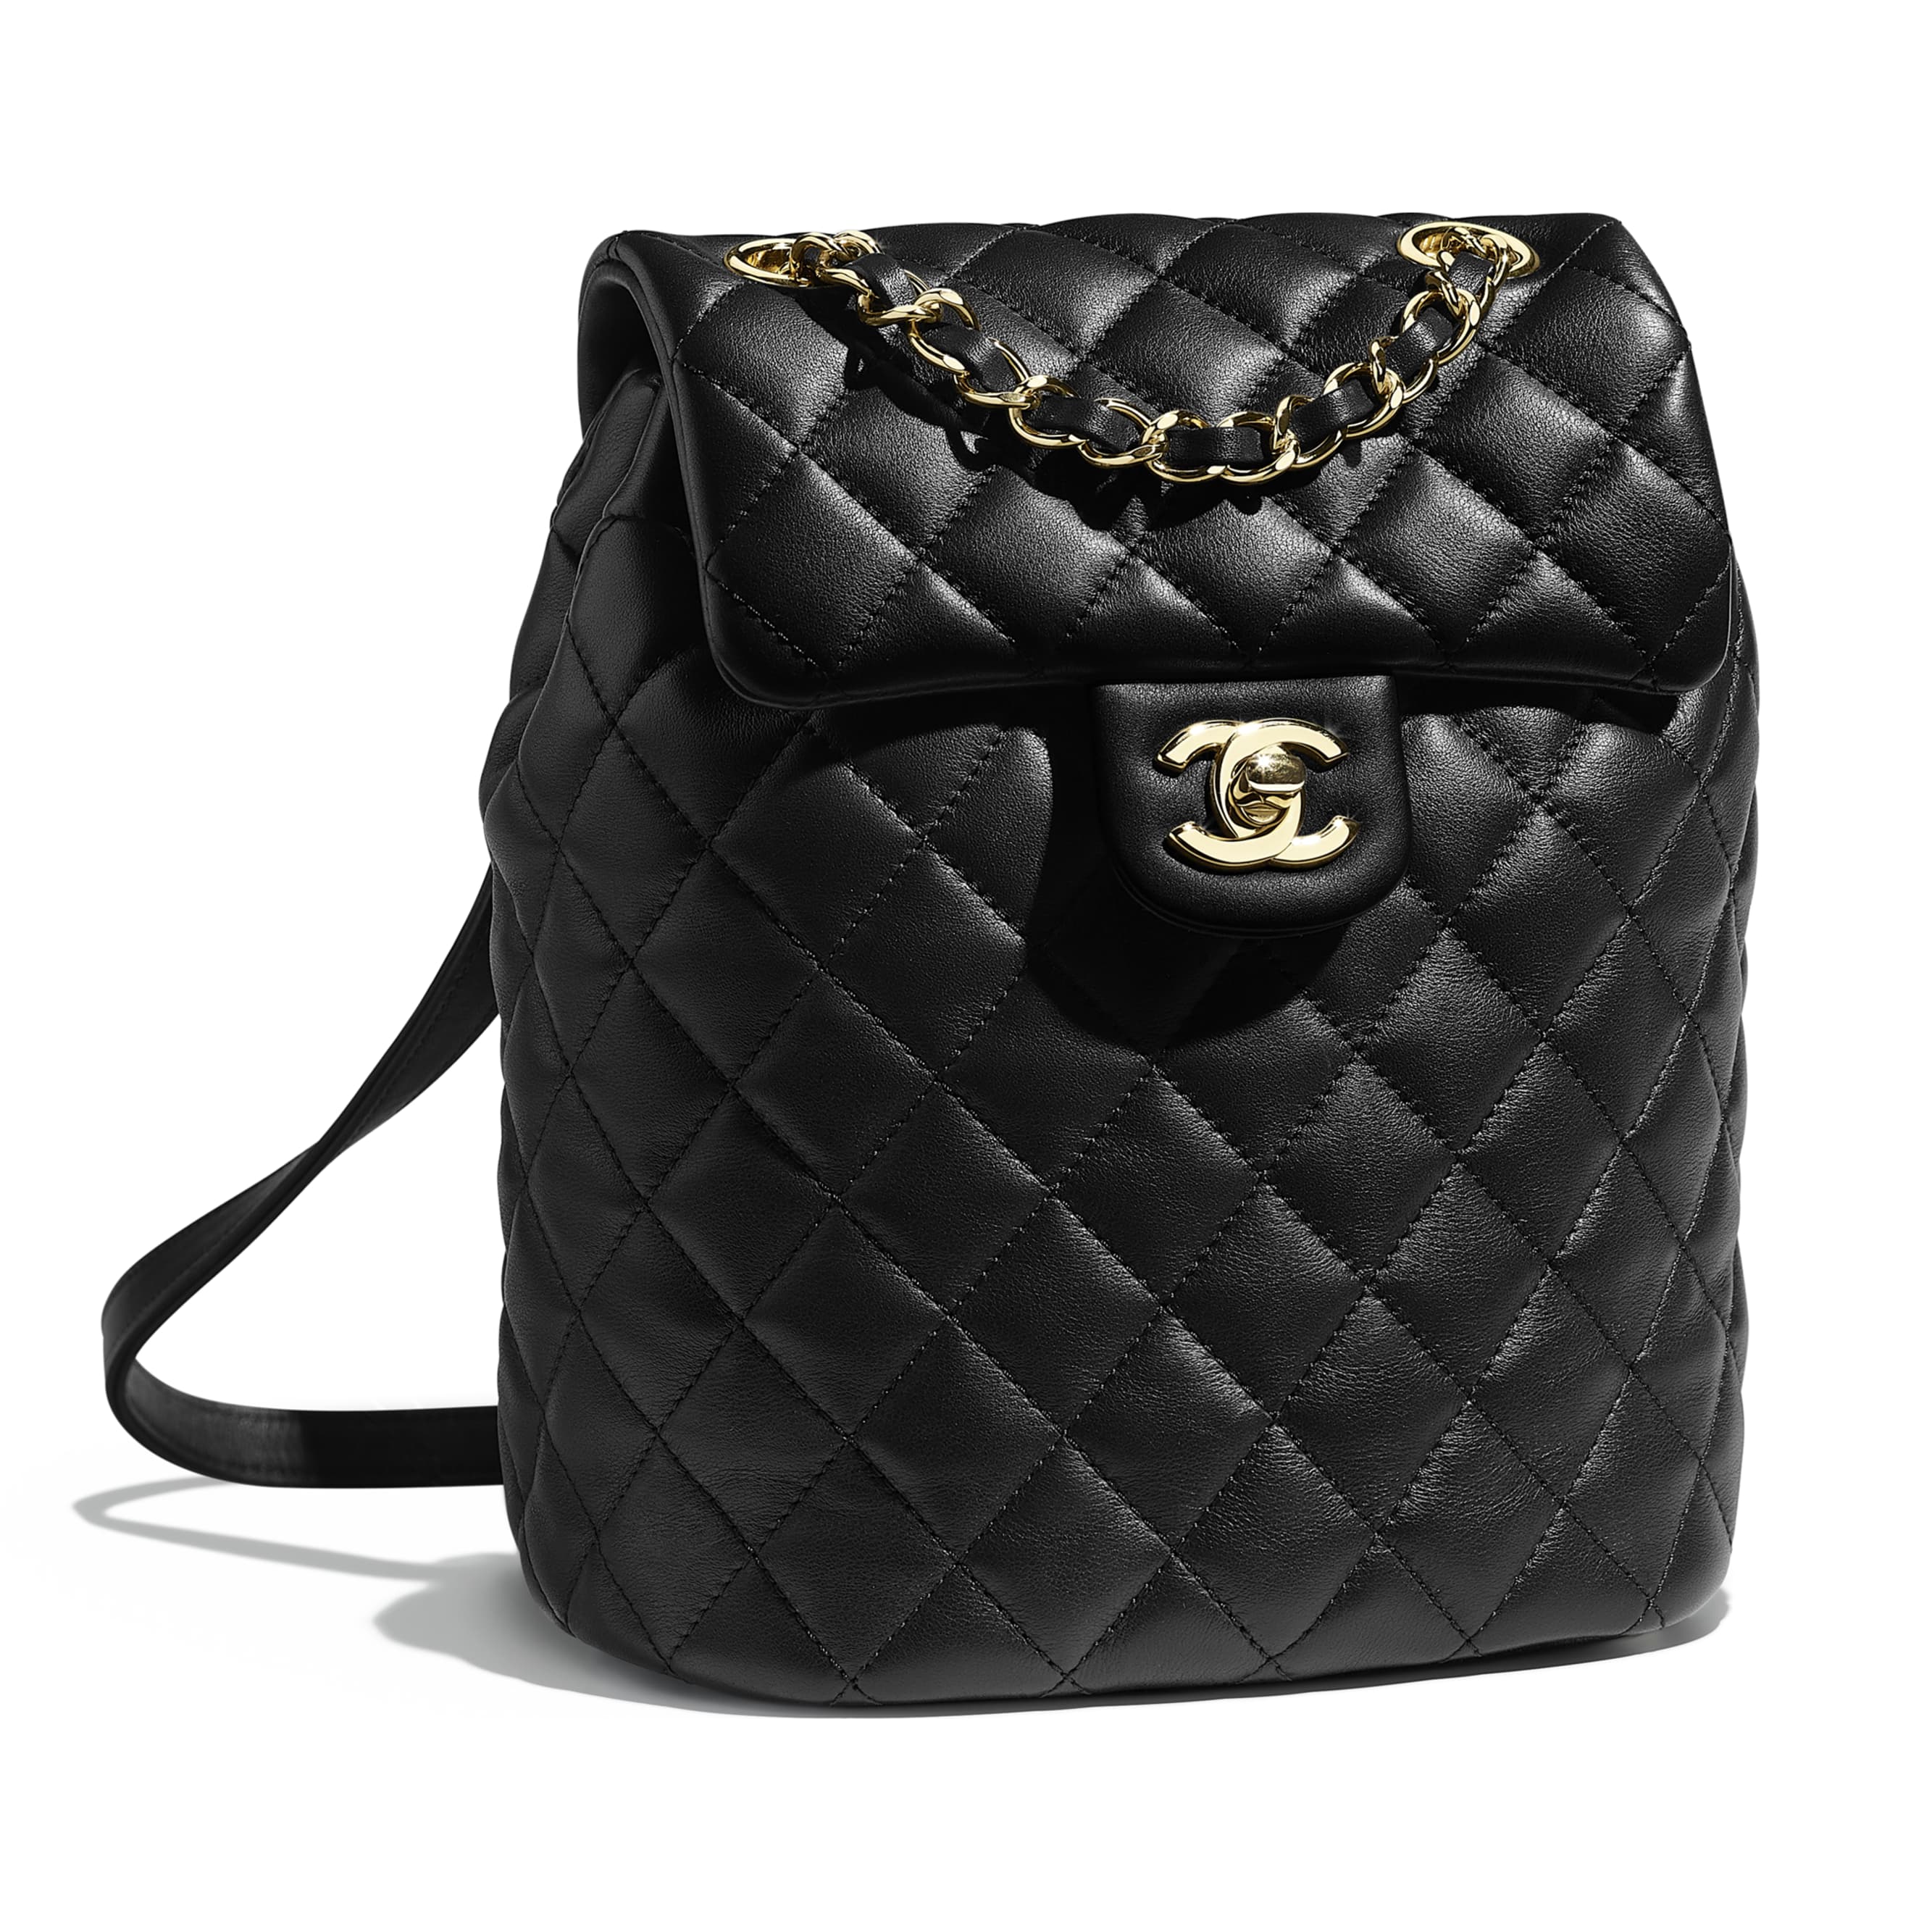 Chanel Backpacks The Best Styles  SACLÀB